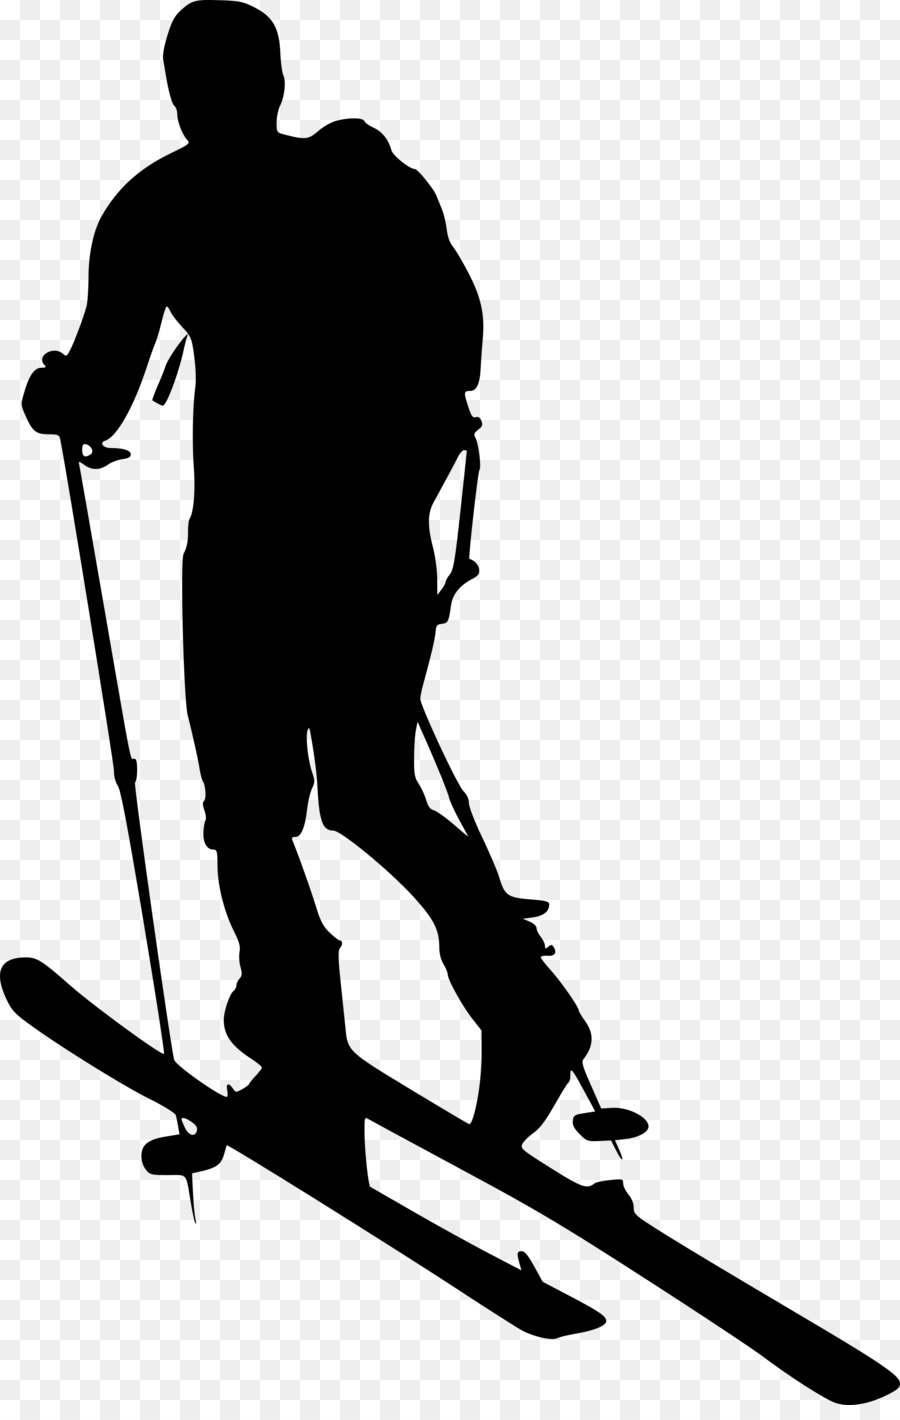 Skiing Ski Poles Portable Network Graphics Ski Bindings - norway silhouette png icon png download - 2252*3515 - Free Transparent Skiing png Download.